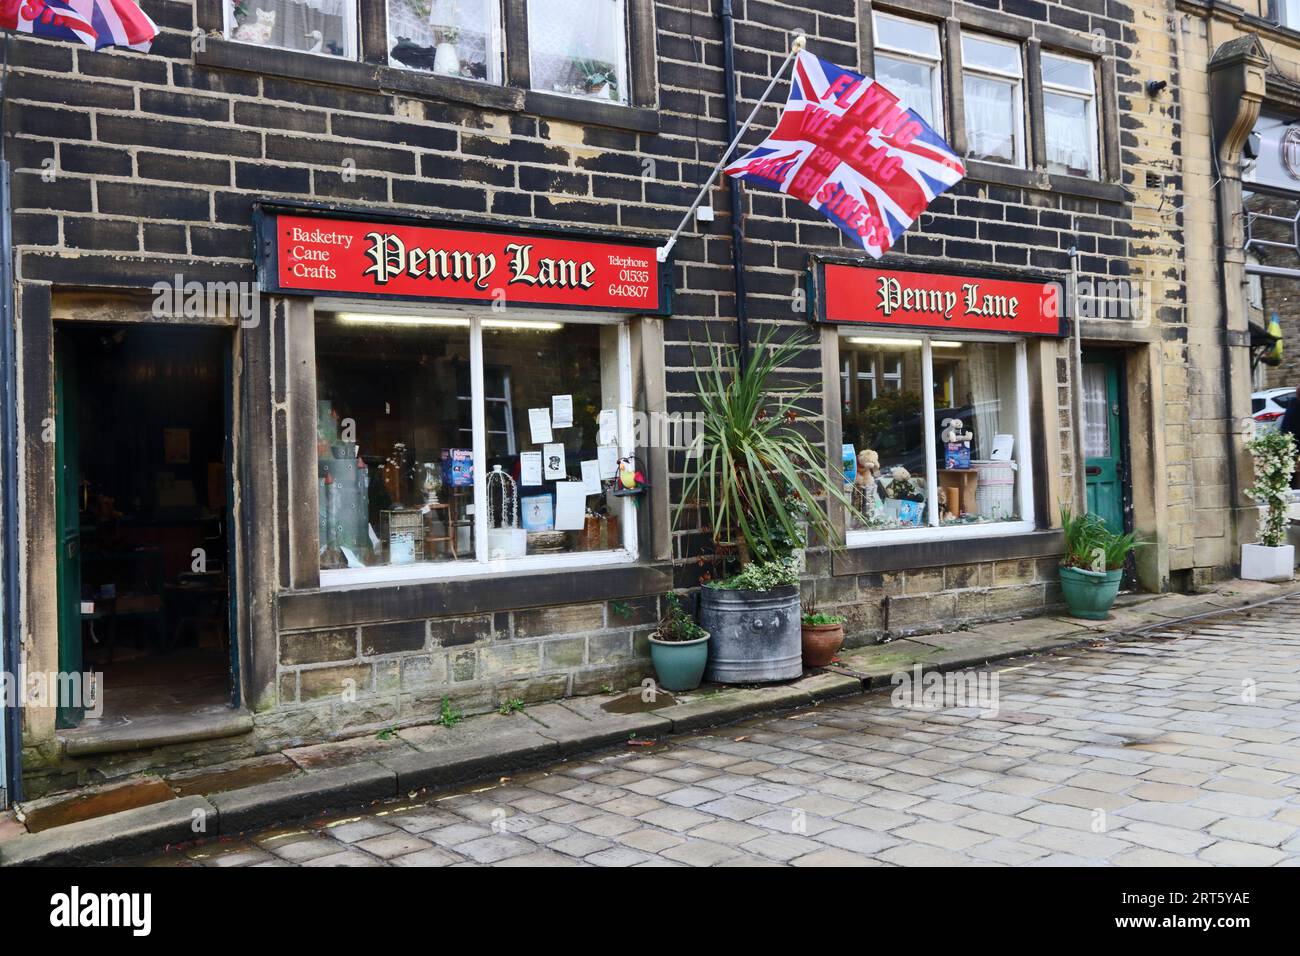 Penny Lane, crafts shop, Howarth Stock Photo